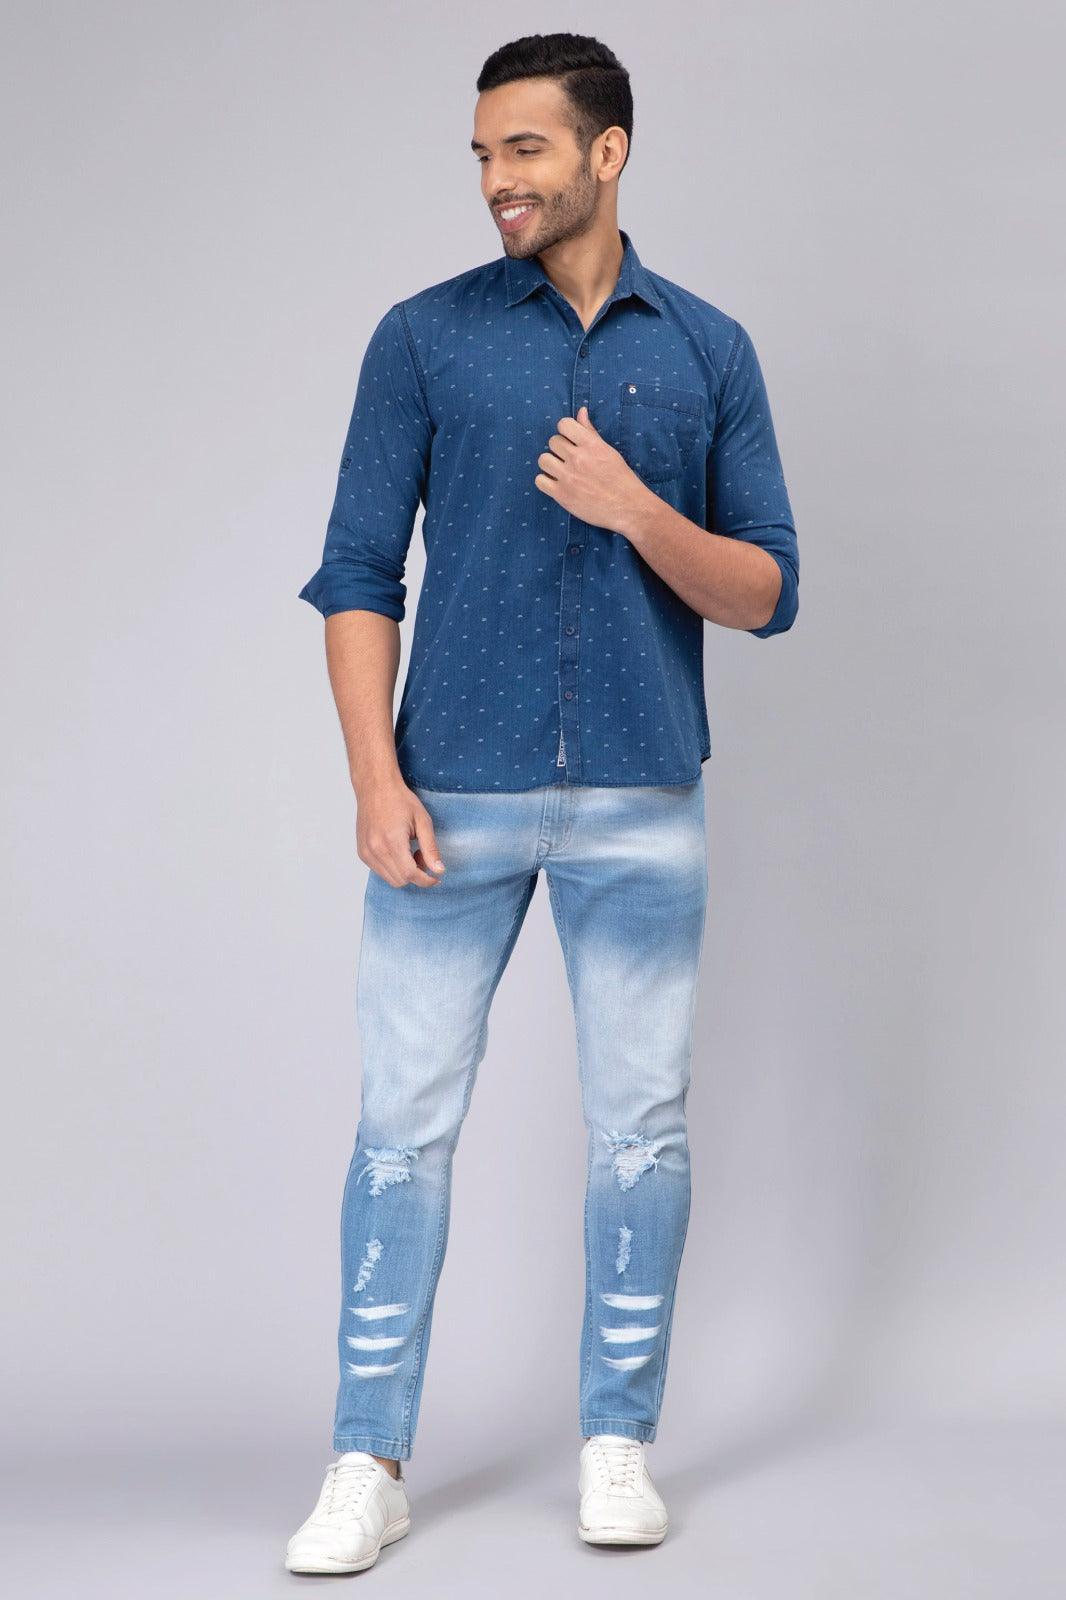 Shirts for Men: Buy Latest Men Shirts Online in India| GAS Jeans